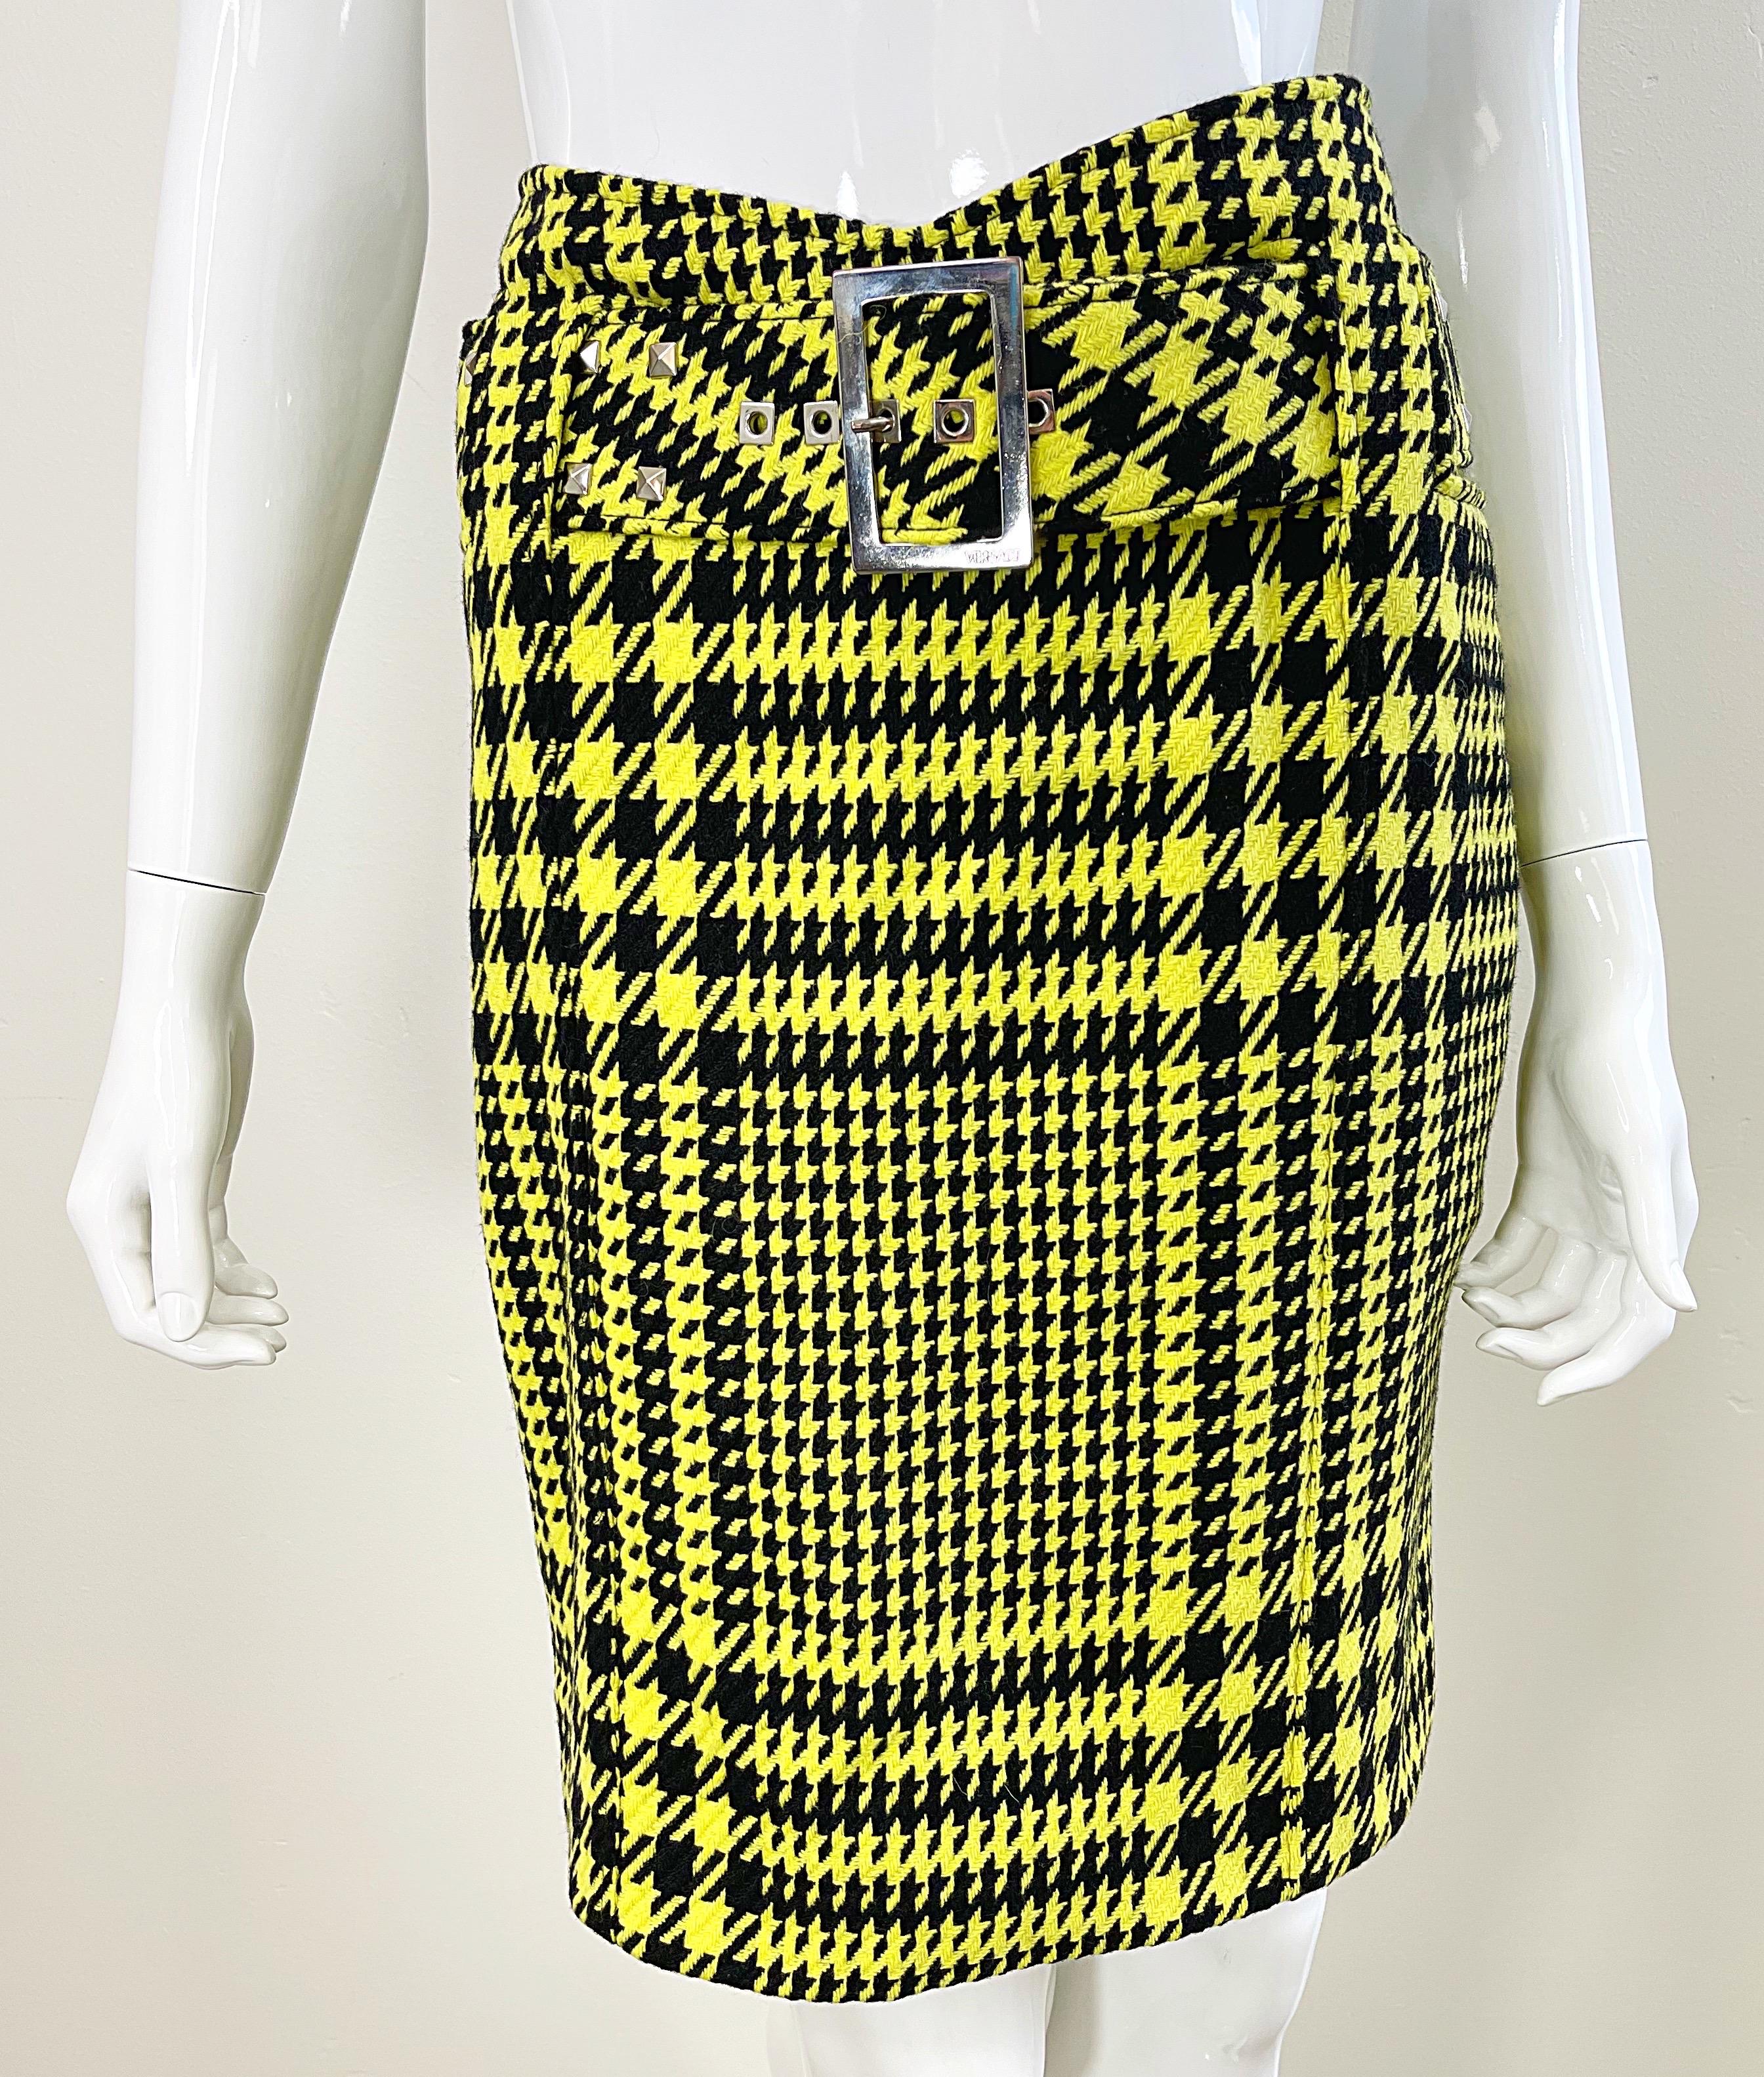 Gianni Versace Fall 2004 Runway Size 8 Yellow Black Houndstooth Belted Skirt For Sale 7